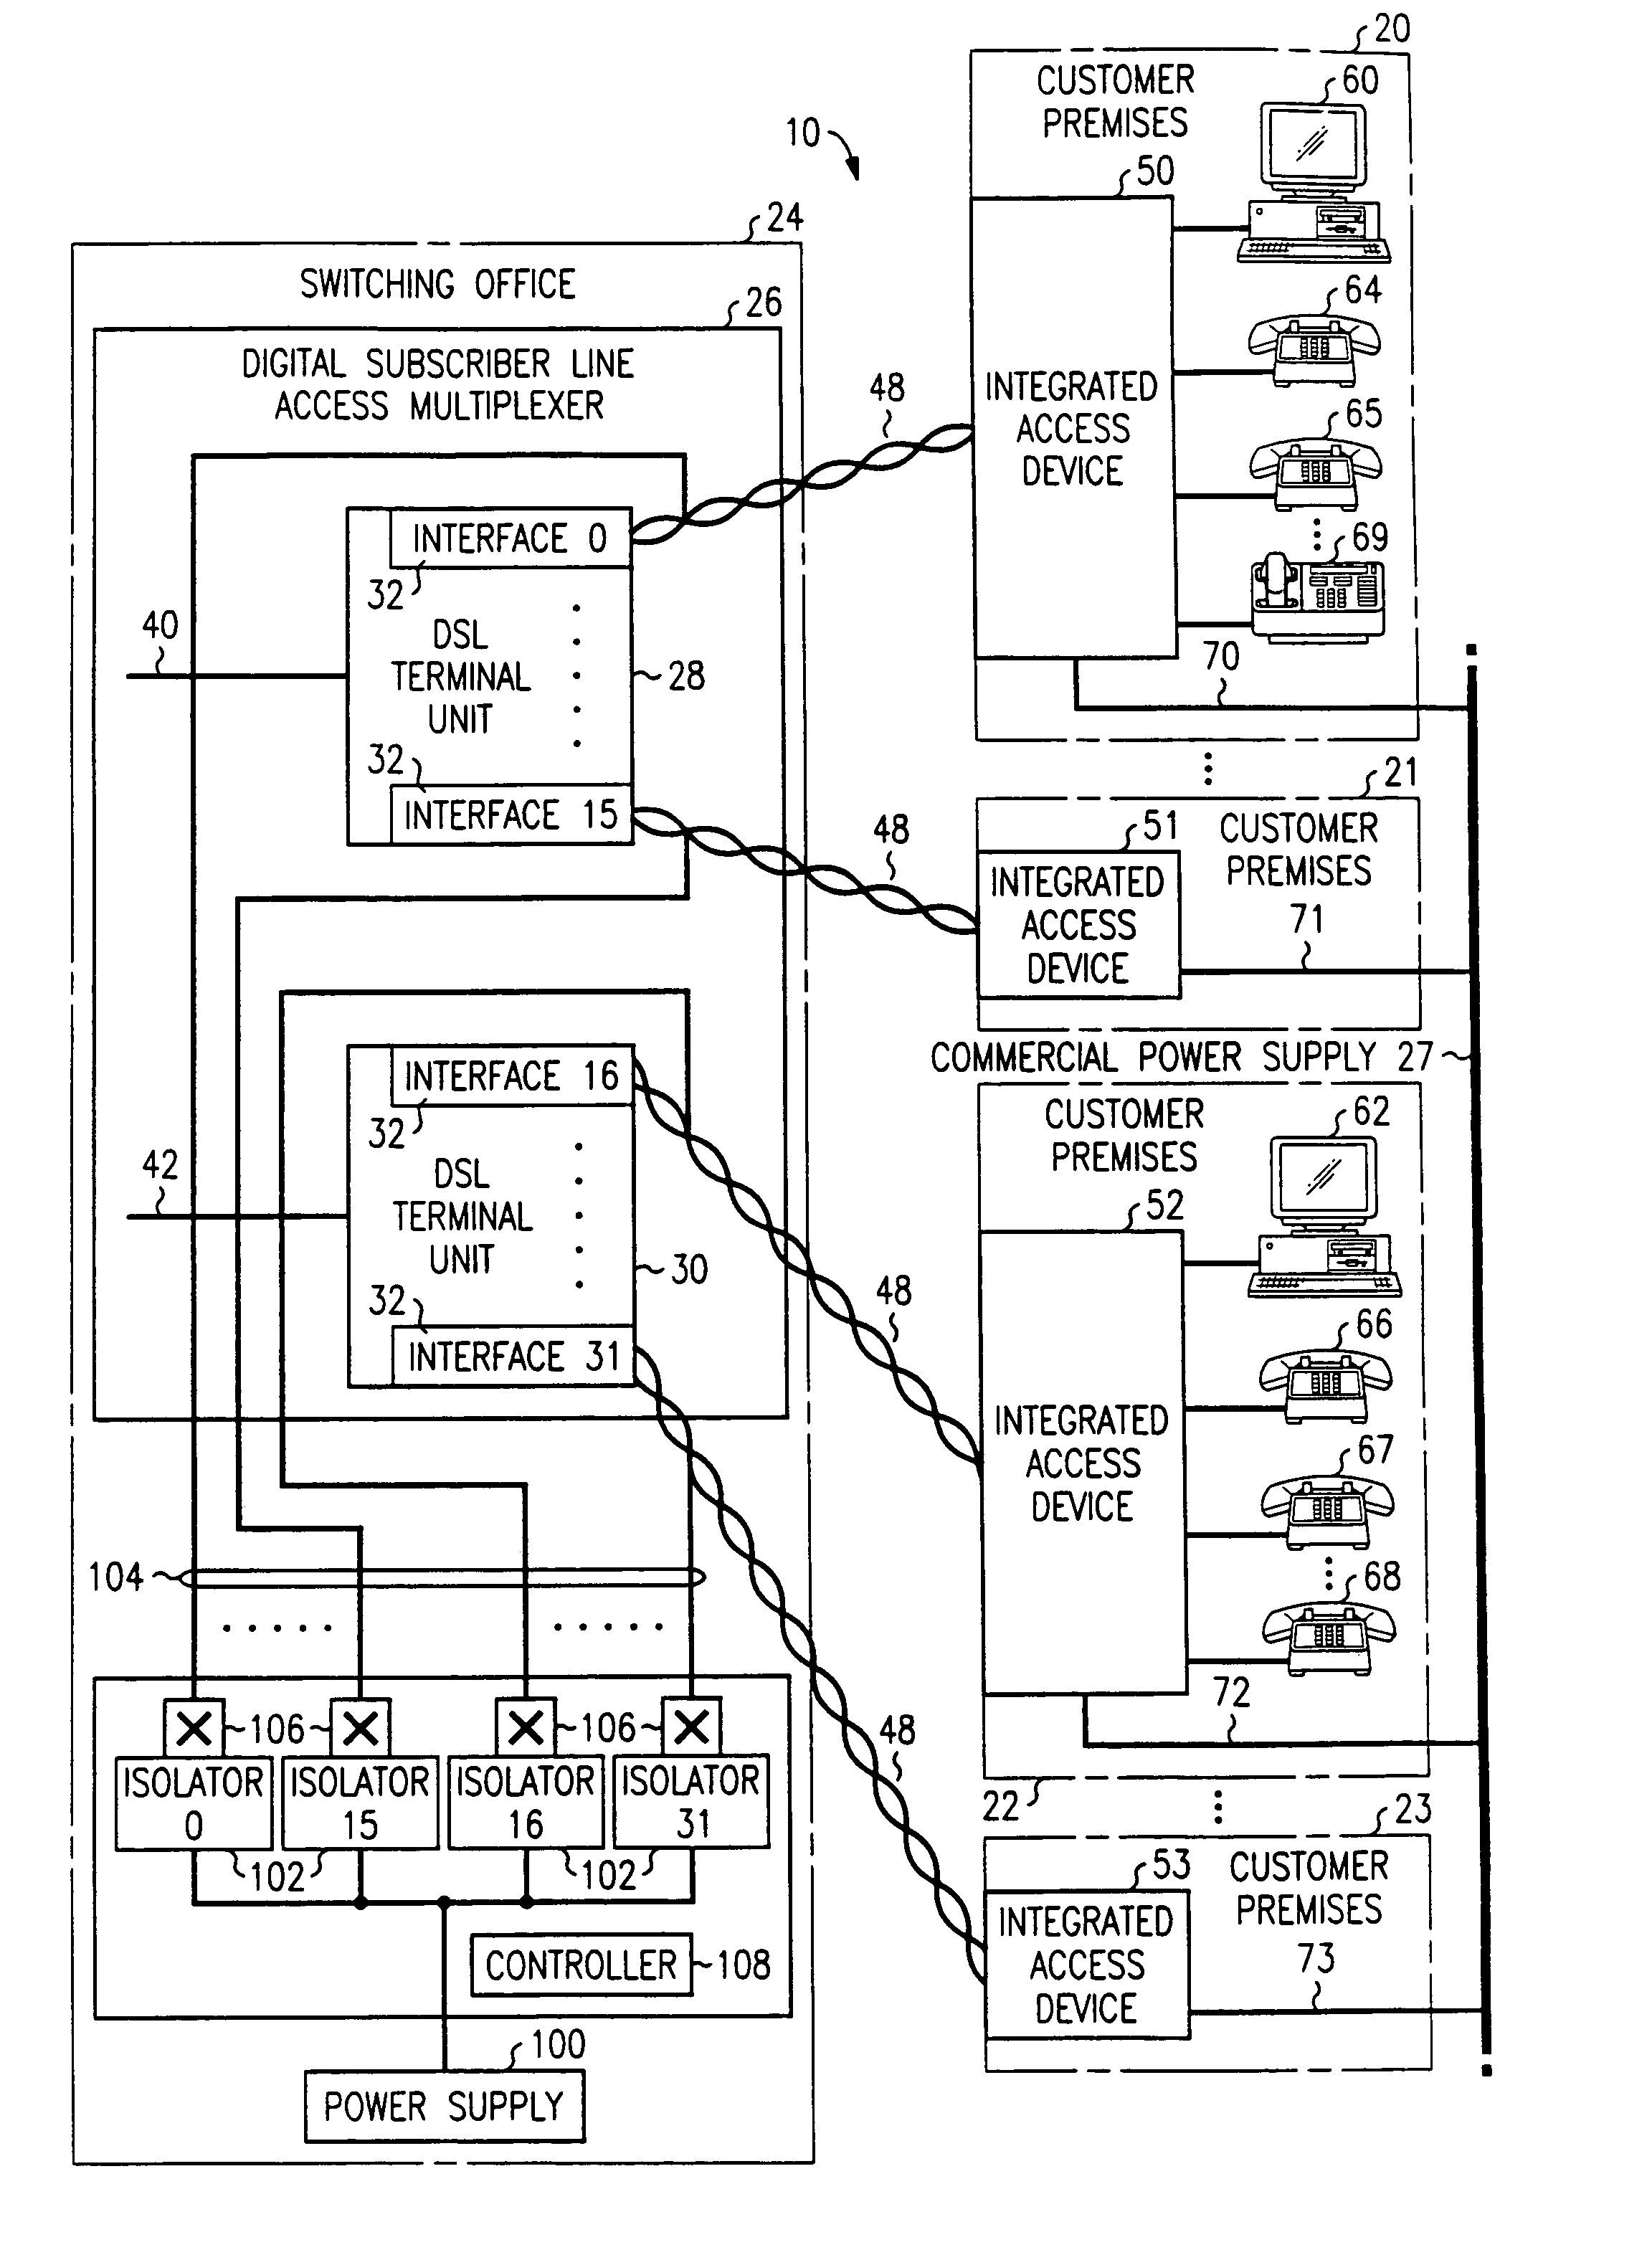 System and method for providing lifeline power service to digital subscriber line customers